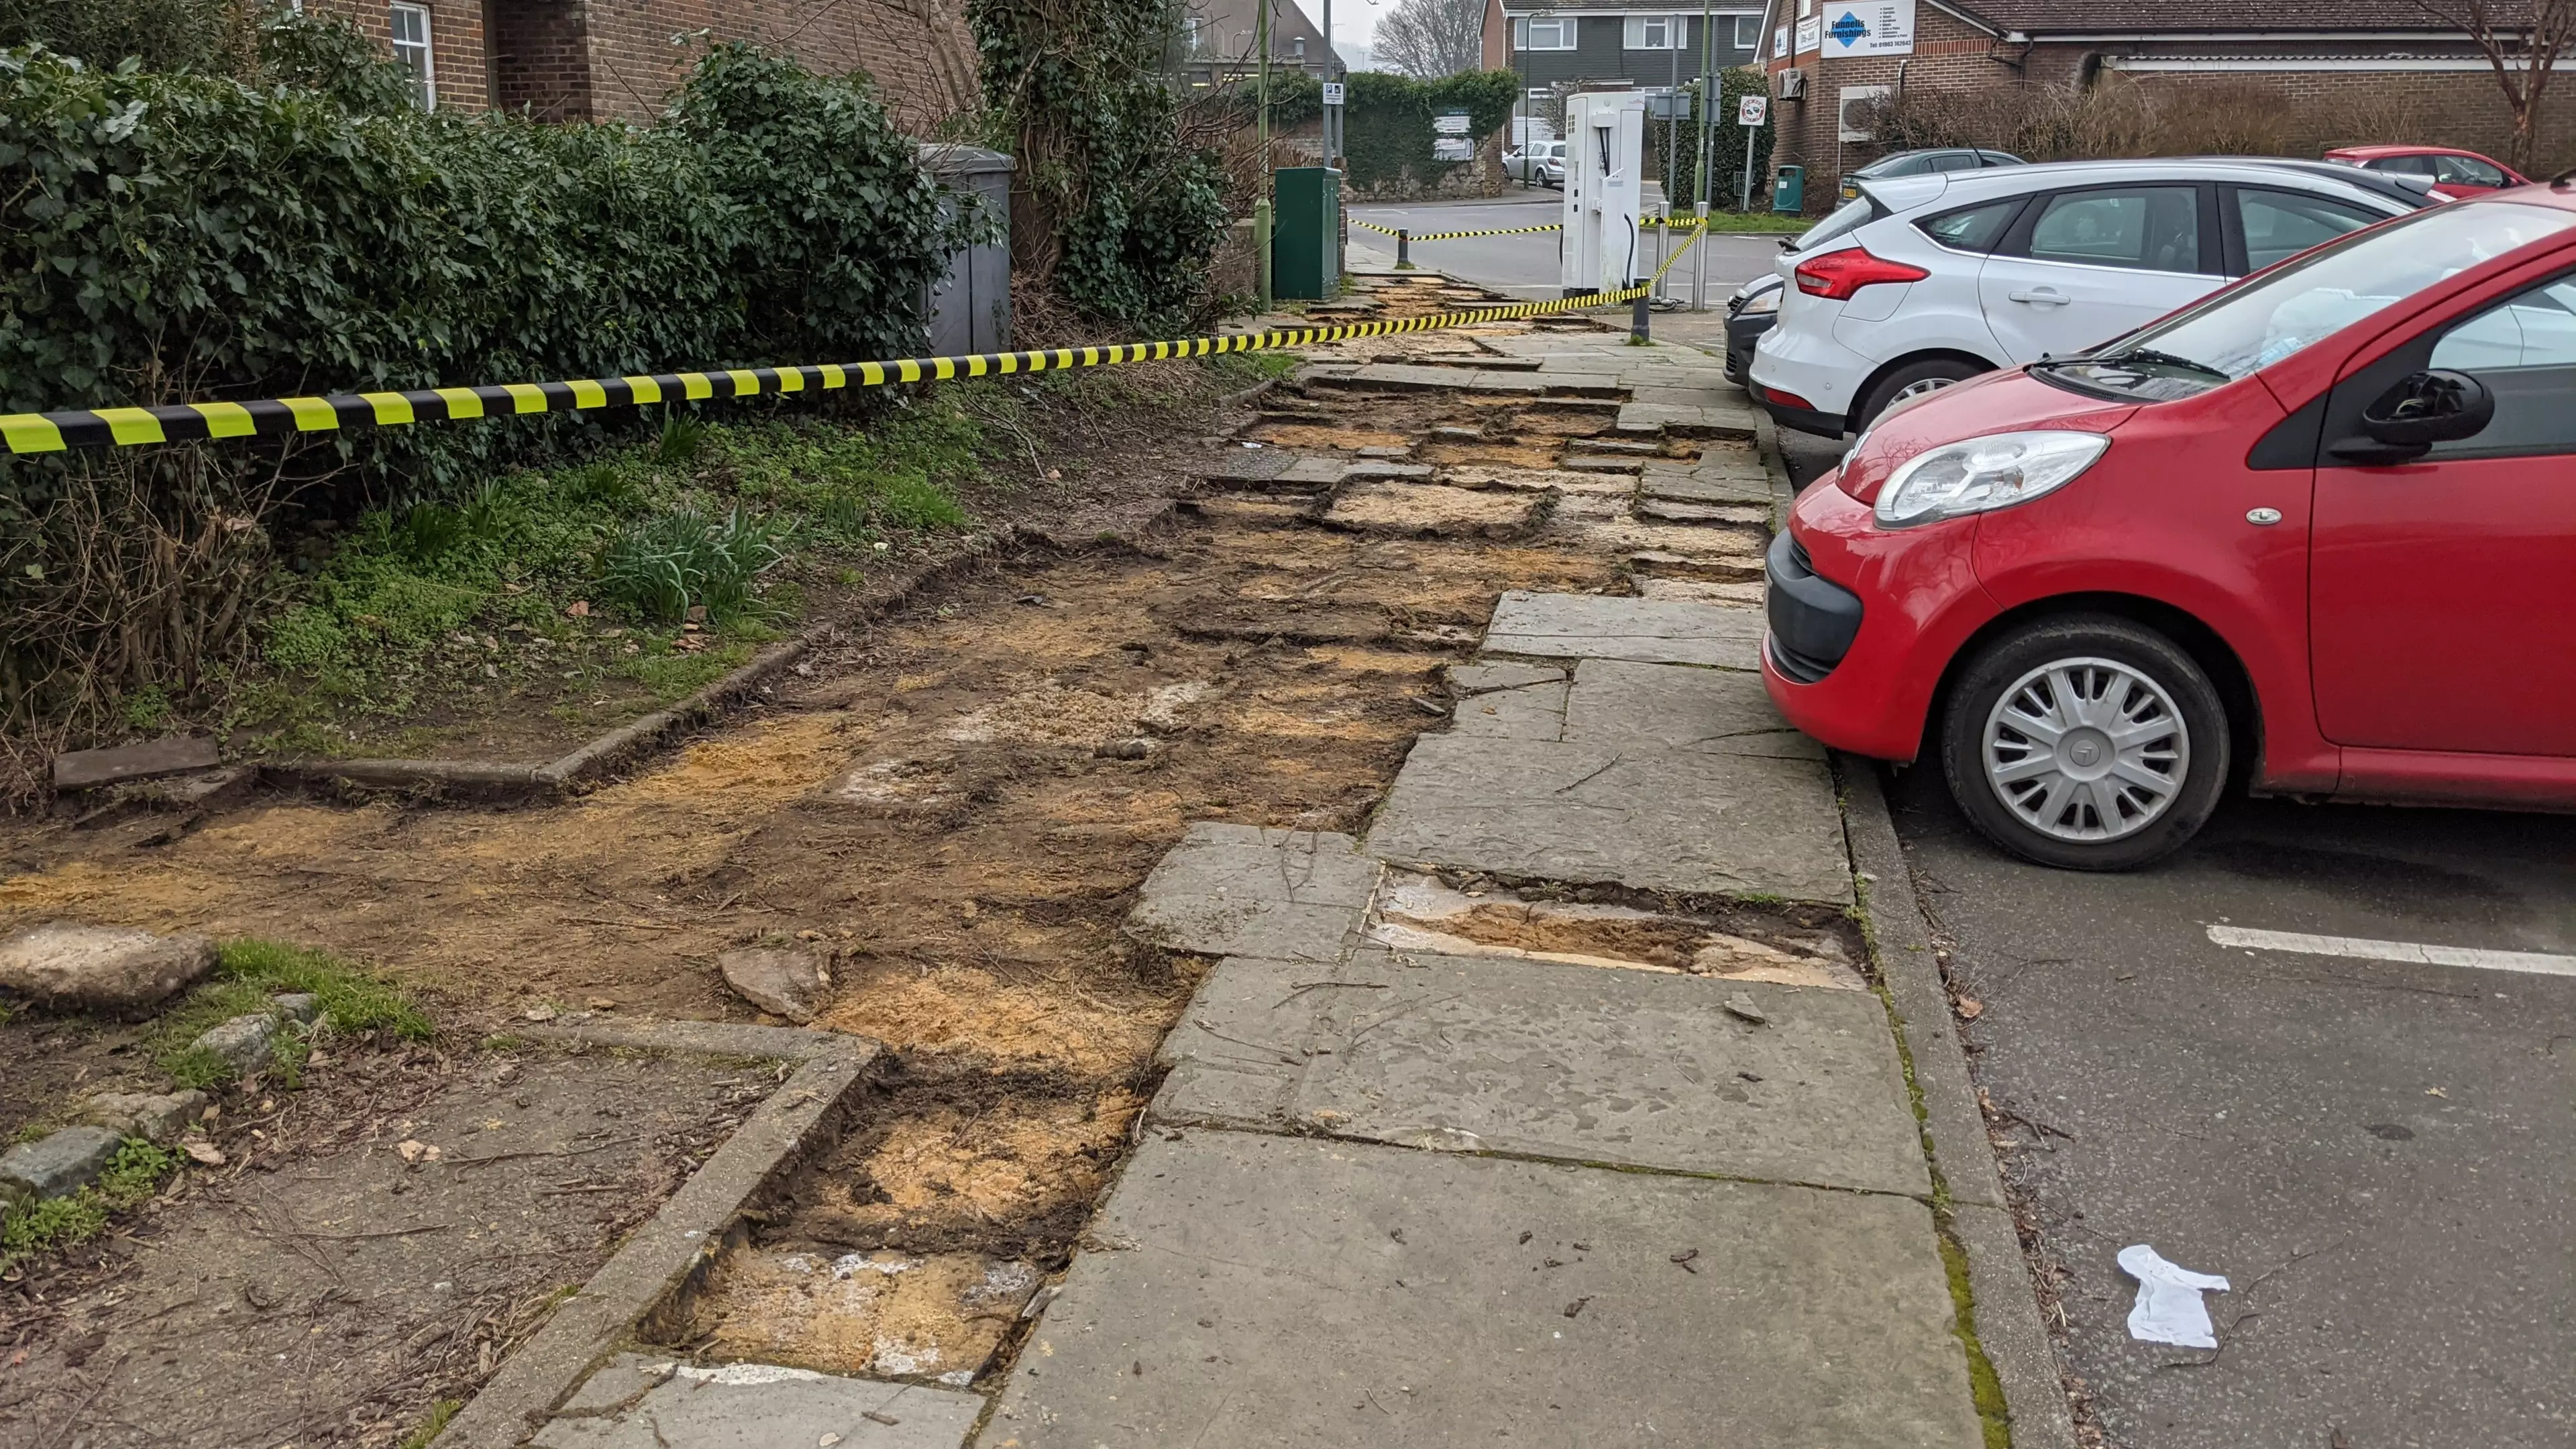 Village Awakens To Discover Someone Has Stolen Almost An Entire Pavement